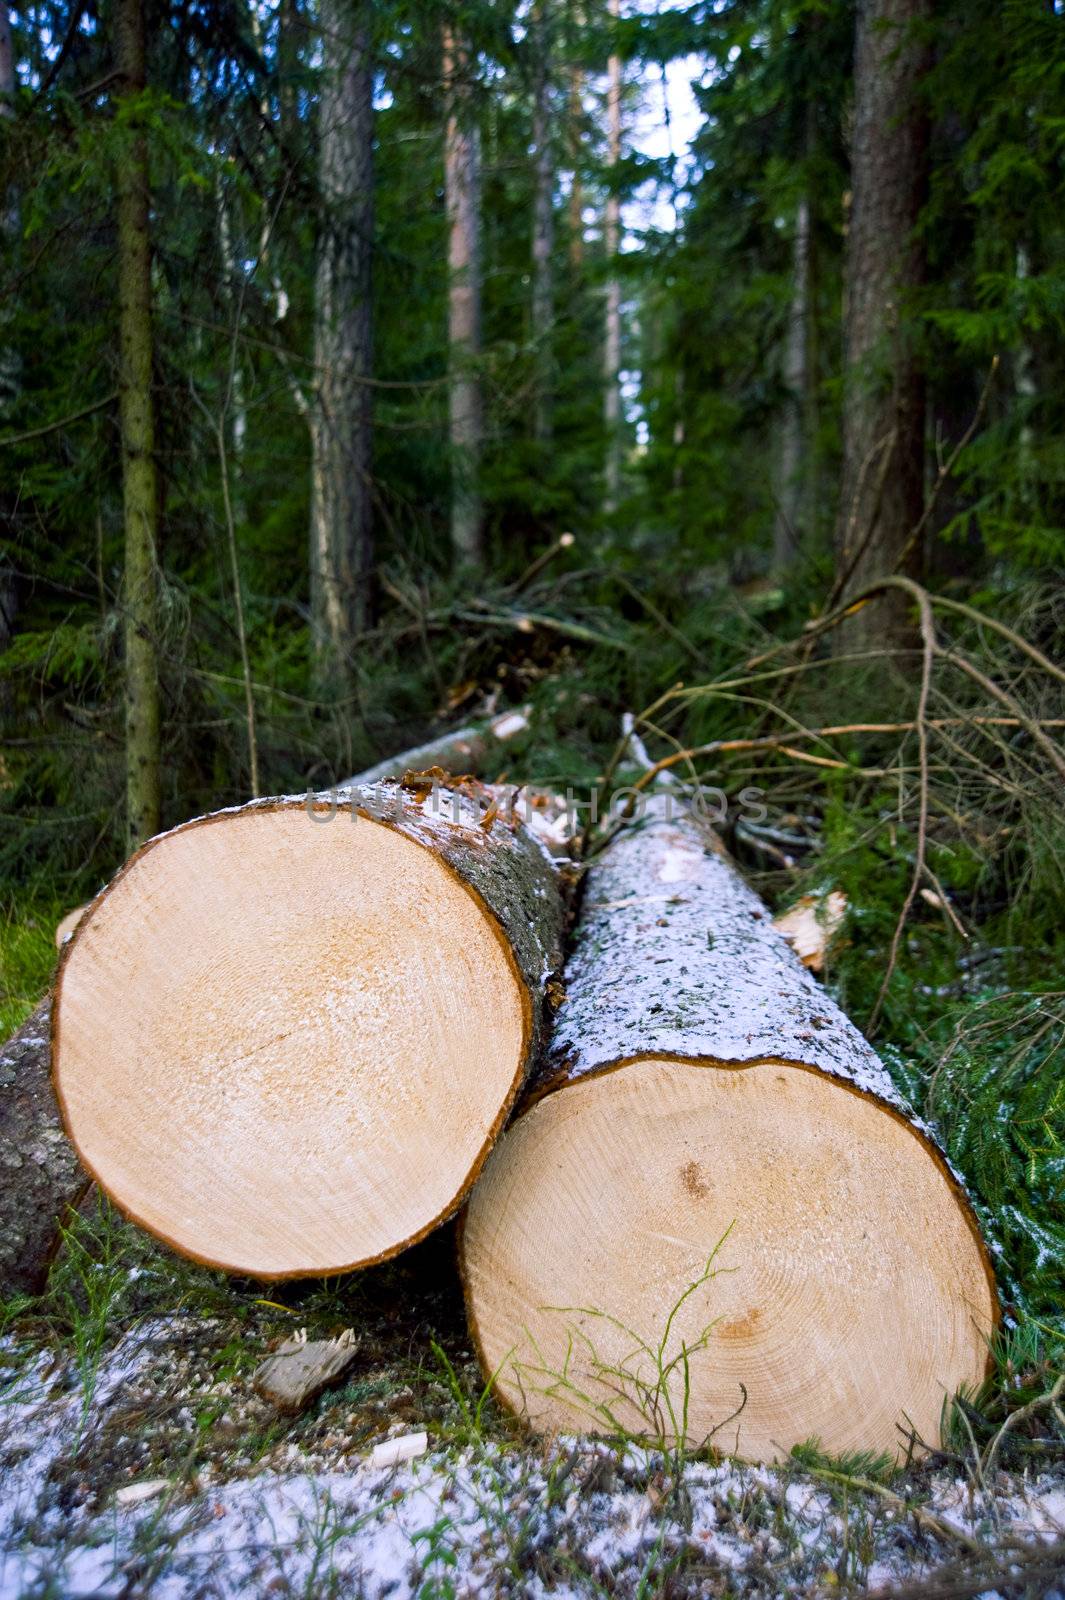 Chopped trees laying on the ground in forest, taken in Finland